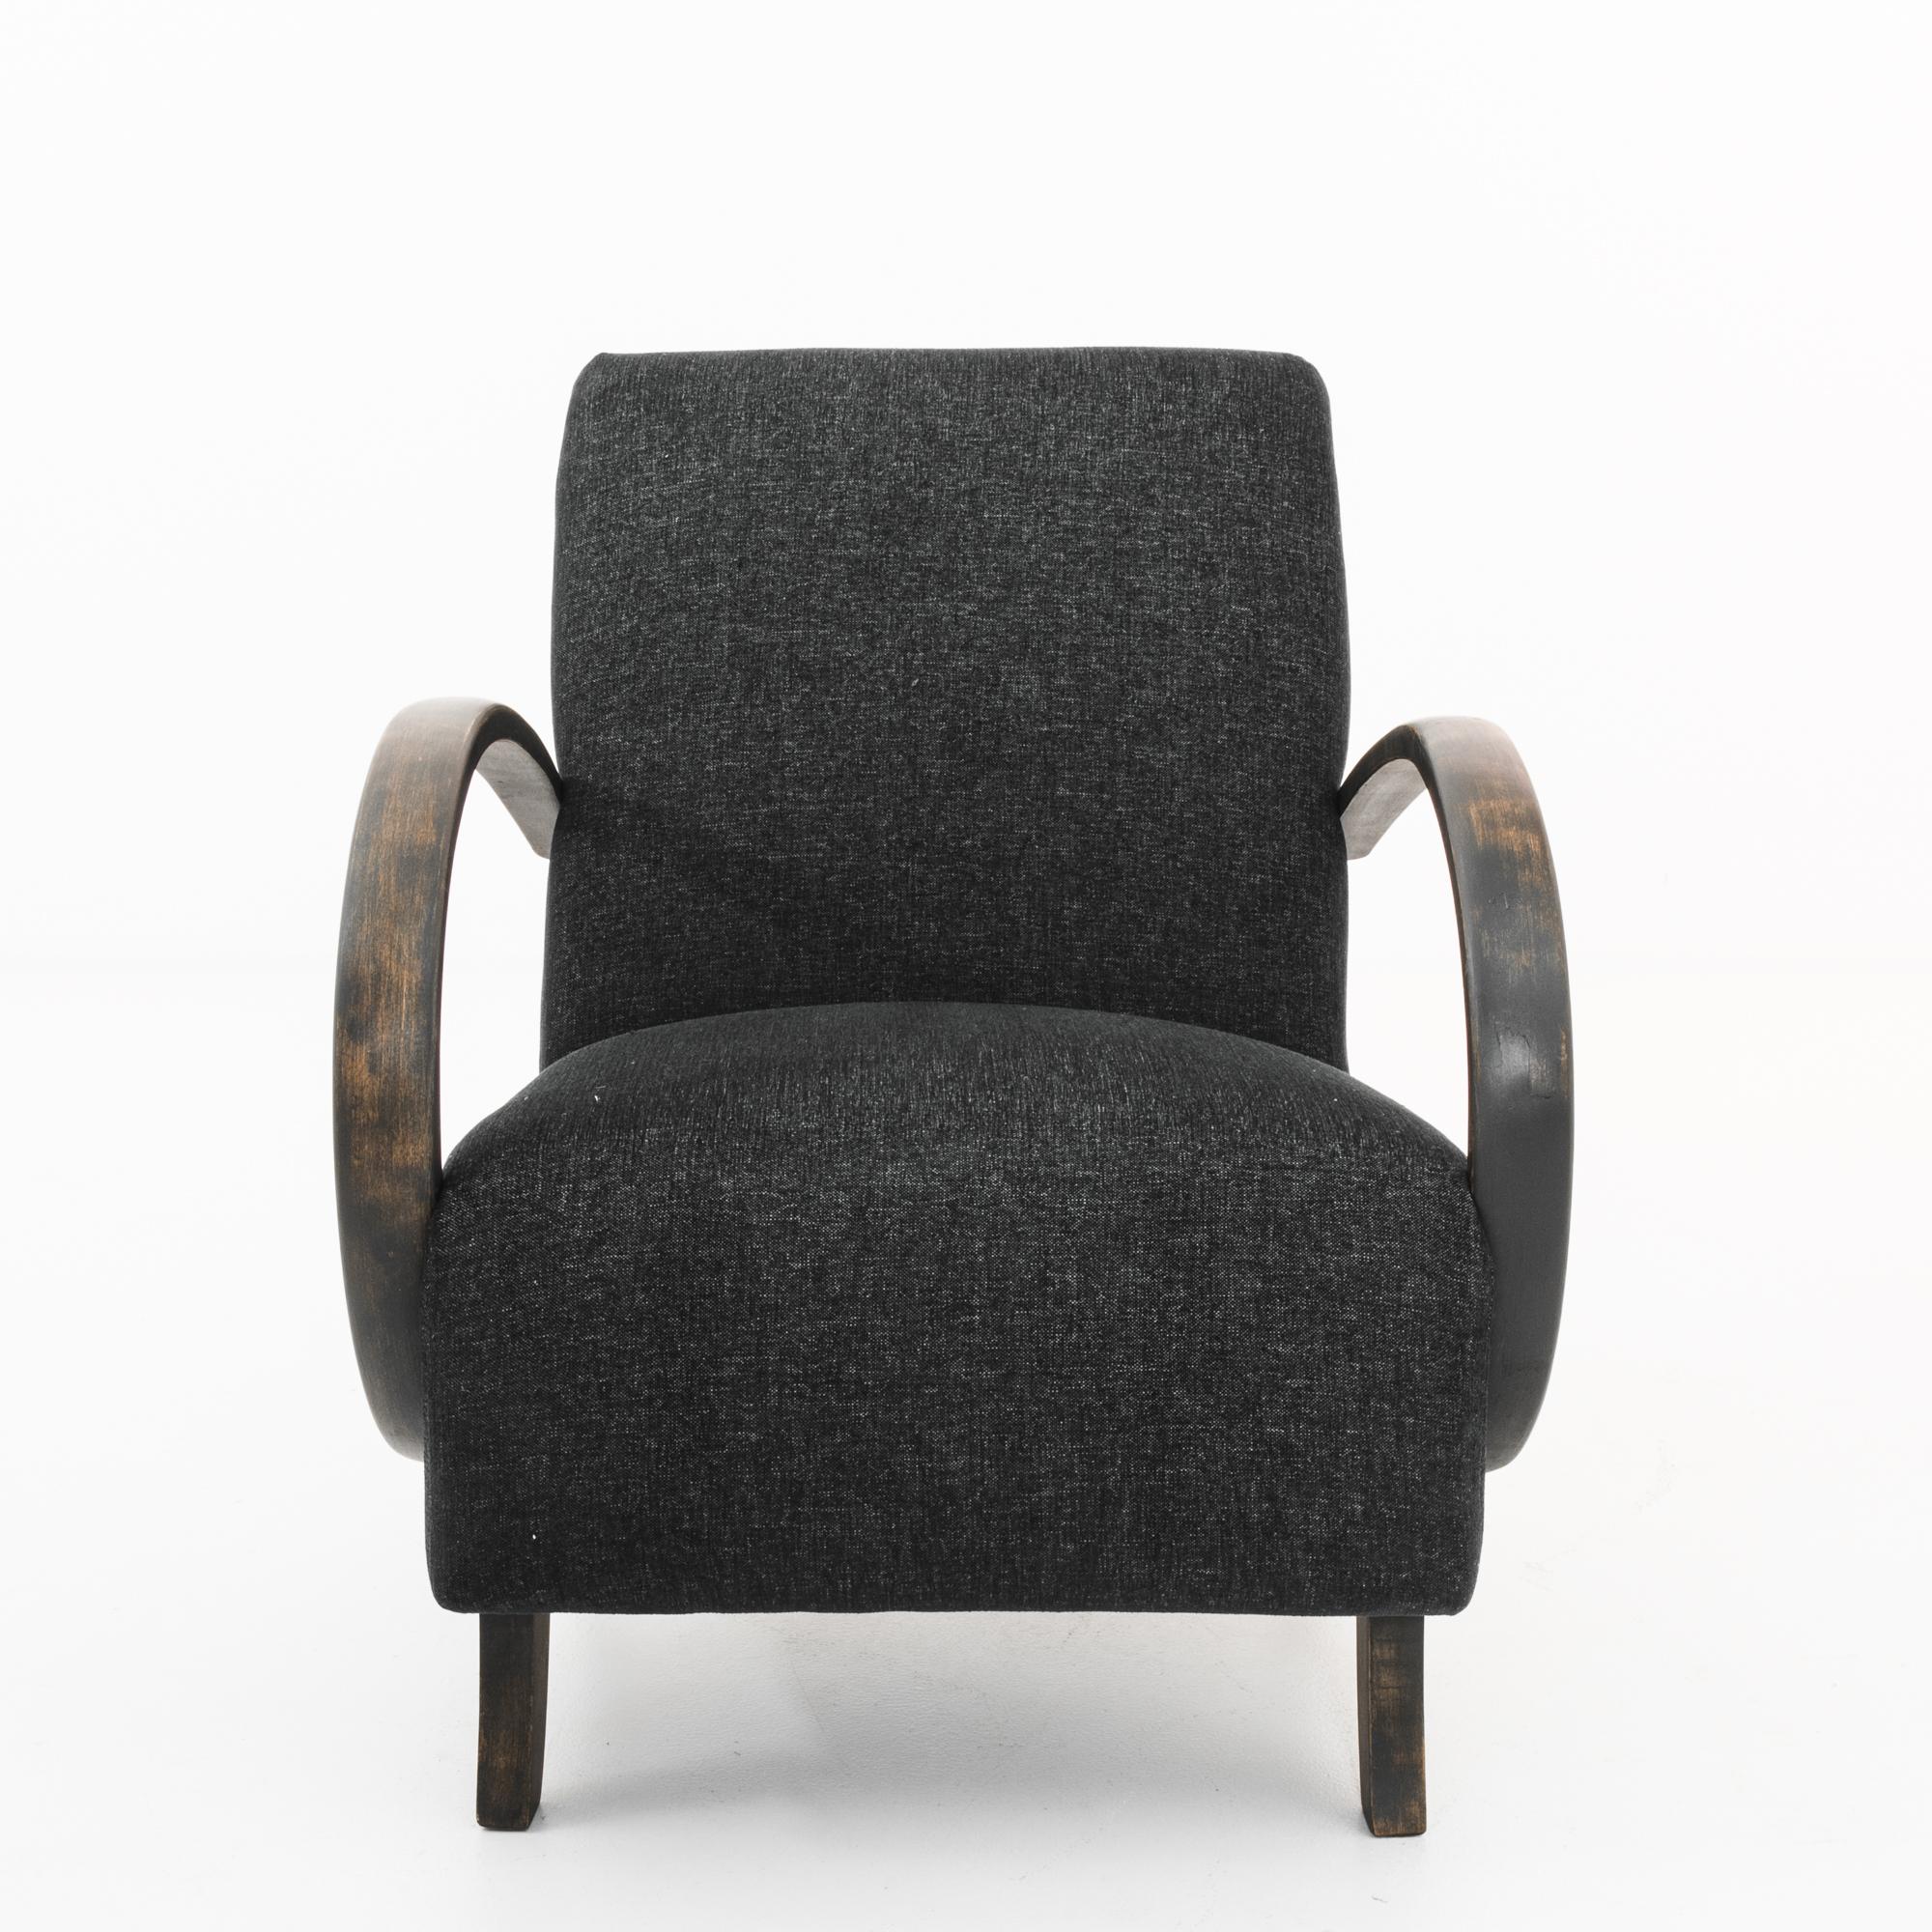 A bentwood upholstered armchair by Czech furniture designer J. Halabala, circa 1960. A Mid-Century Modern silhouette, upholstered in dark grey twill. The cushioned seat is parenthesized by the dramatic swoop of the wooden armrests; the curves of the